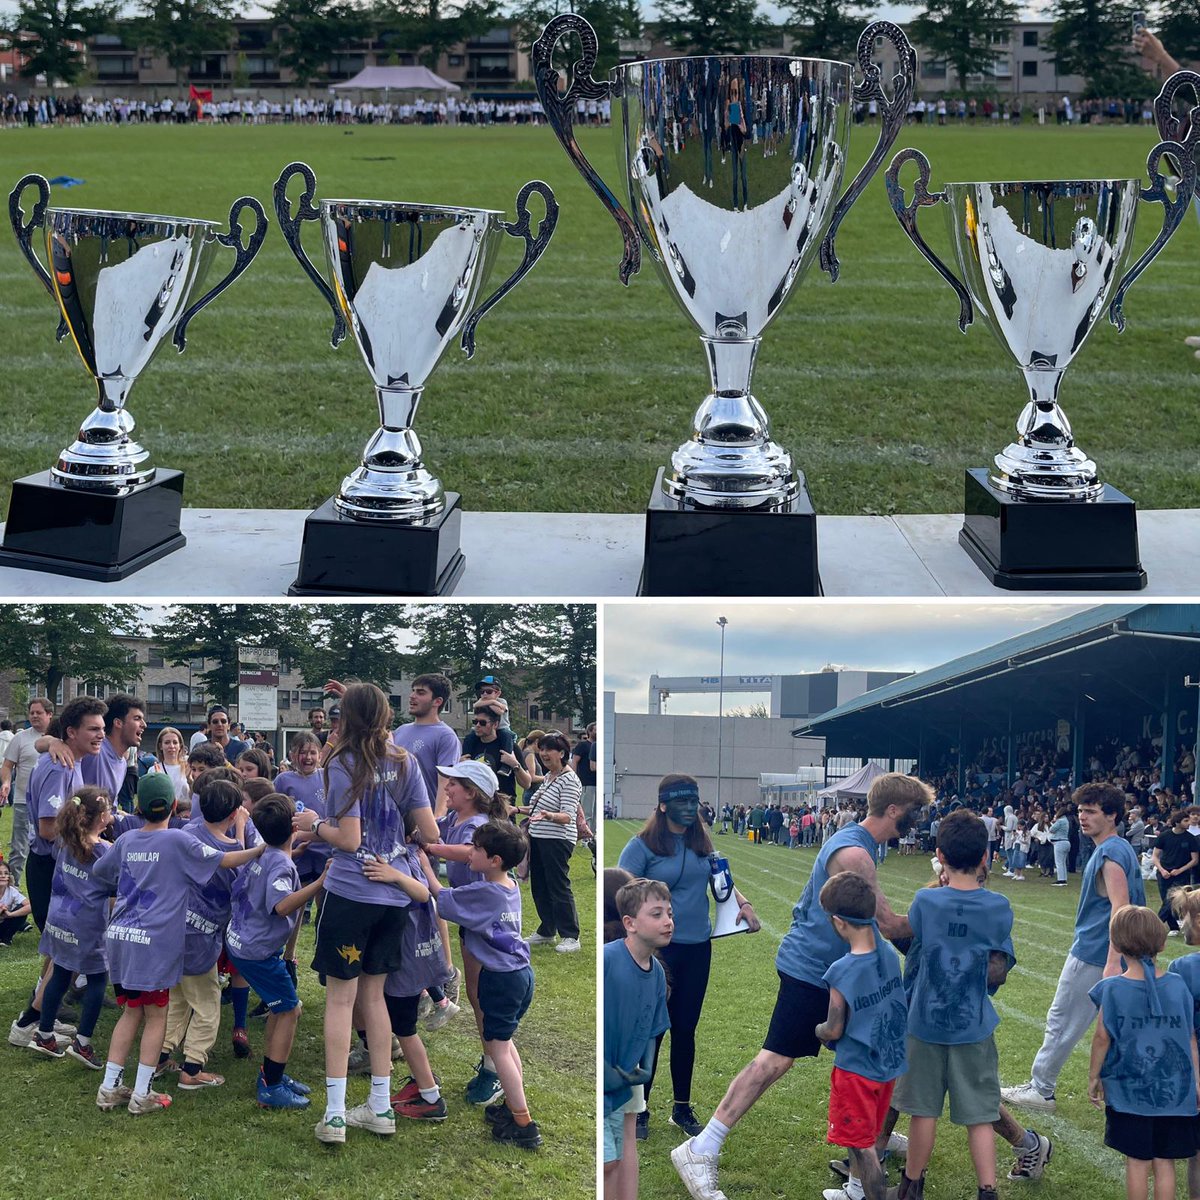 🇧🇪Belgium Jewish youth movements show us that #JewishLife continues to thrive, despite the difficult times and rise of antisemitism. Lag Baomer was celebrated through sport competition with over 1000 Jewish youth. Congratulations to all for participating !